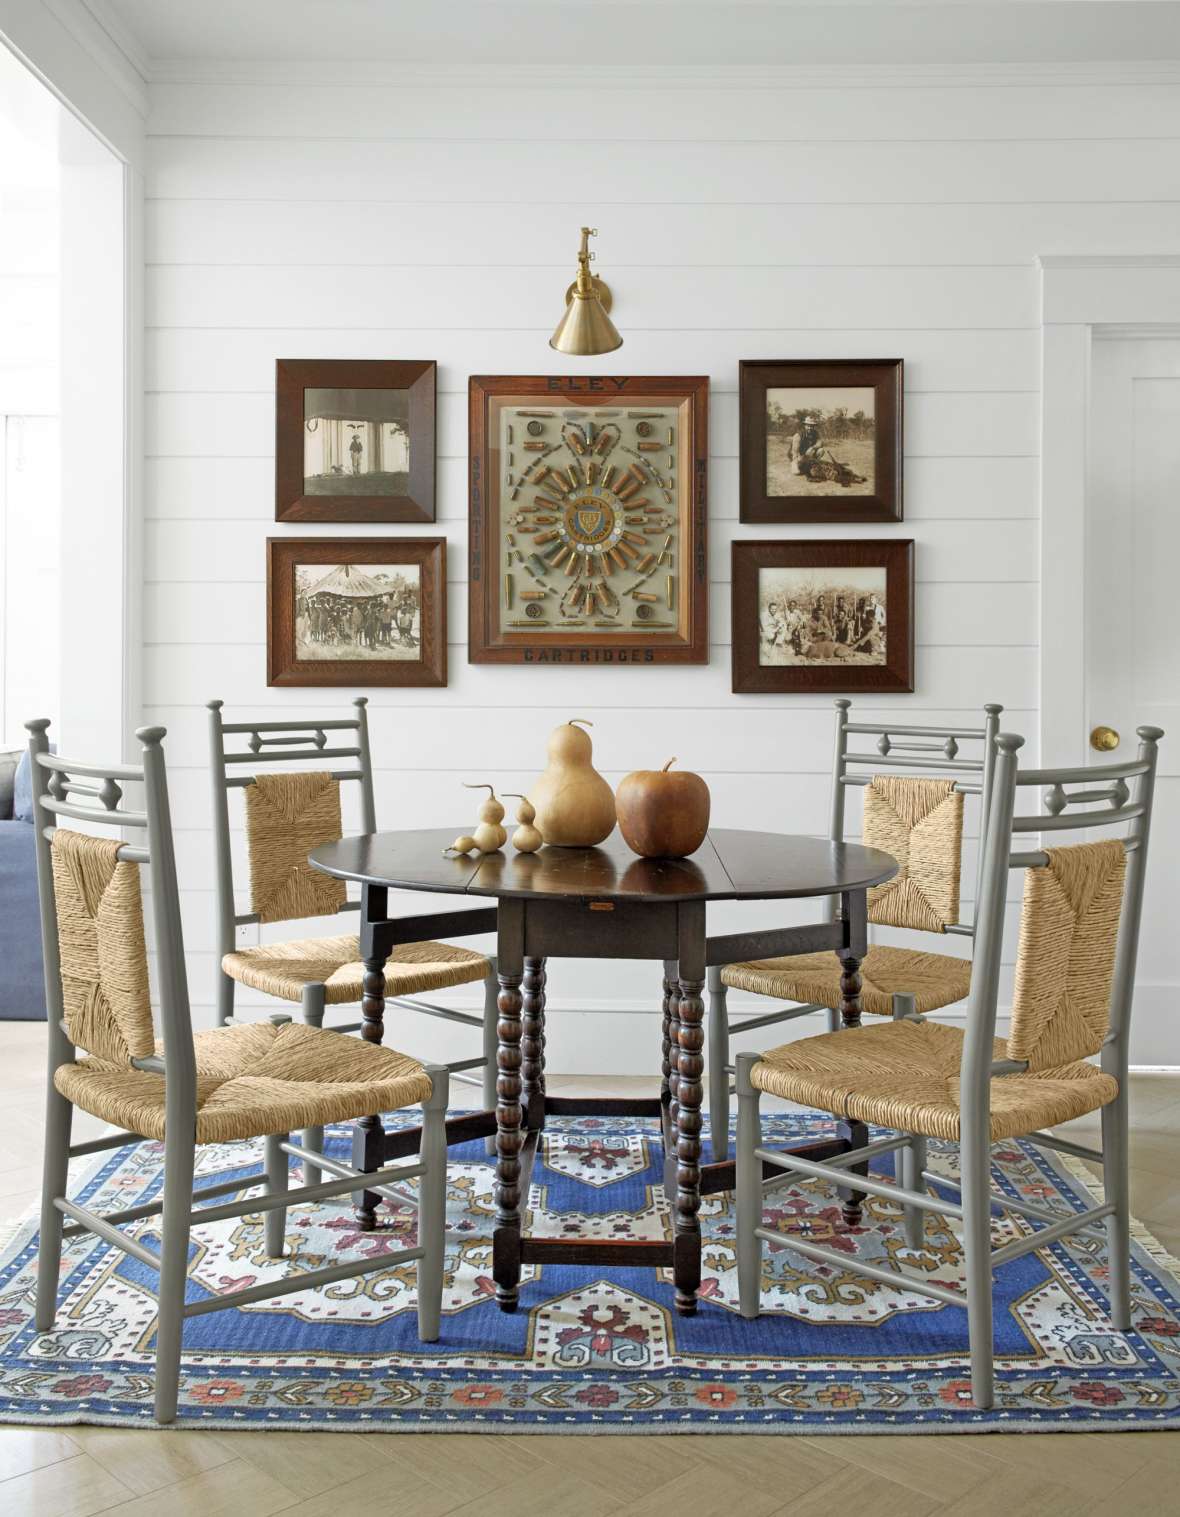 dining room accent pieces meilleur scpi easy fall decorating ideas autumn decor tips try table slim glass small round mirror plant stand farmhouse style stained light full wall